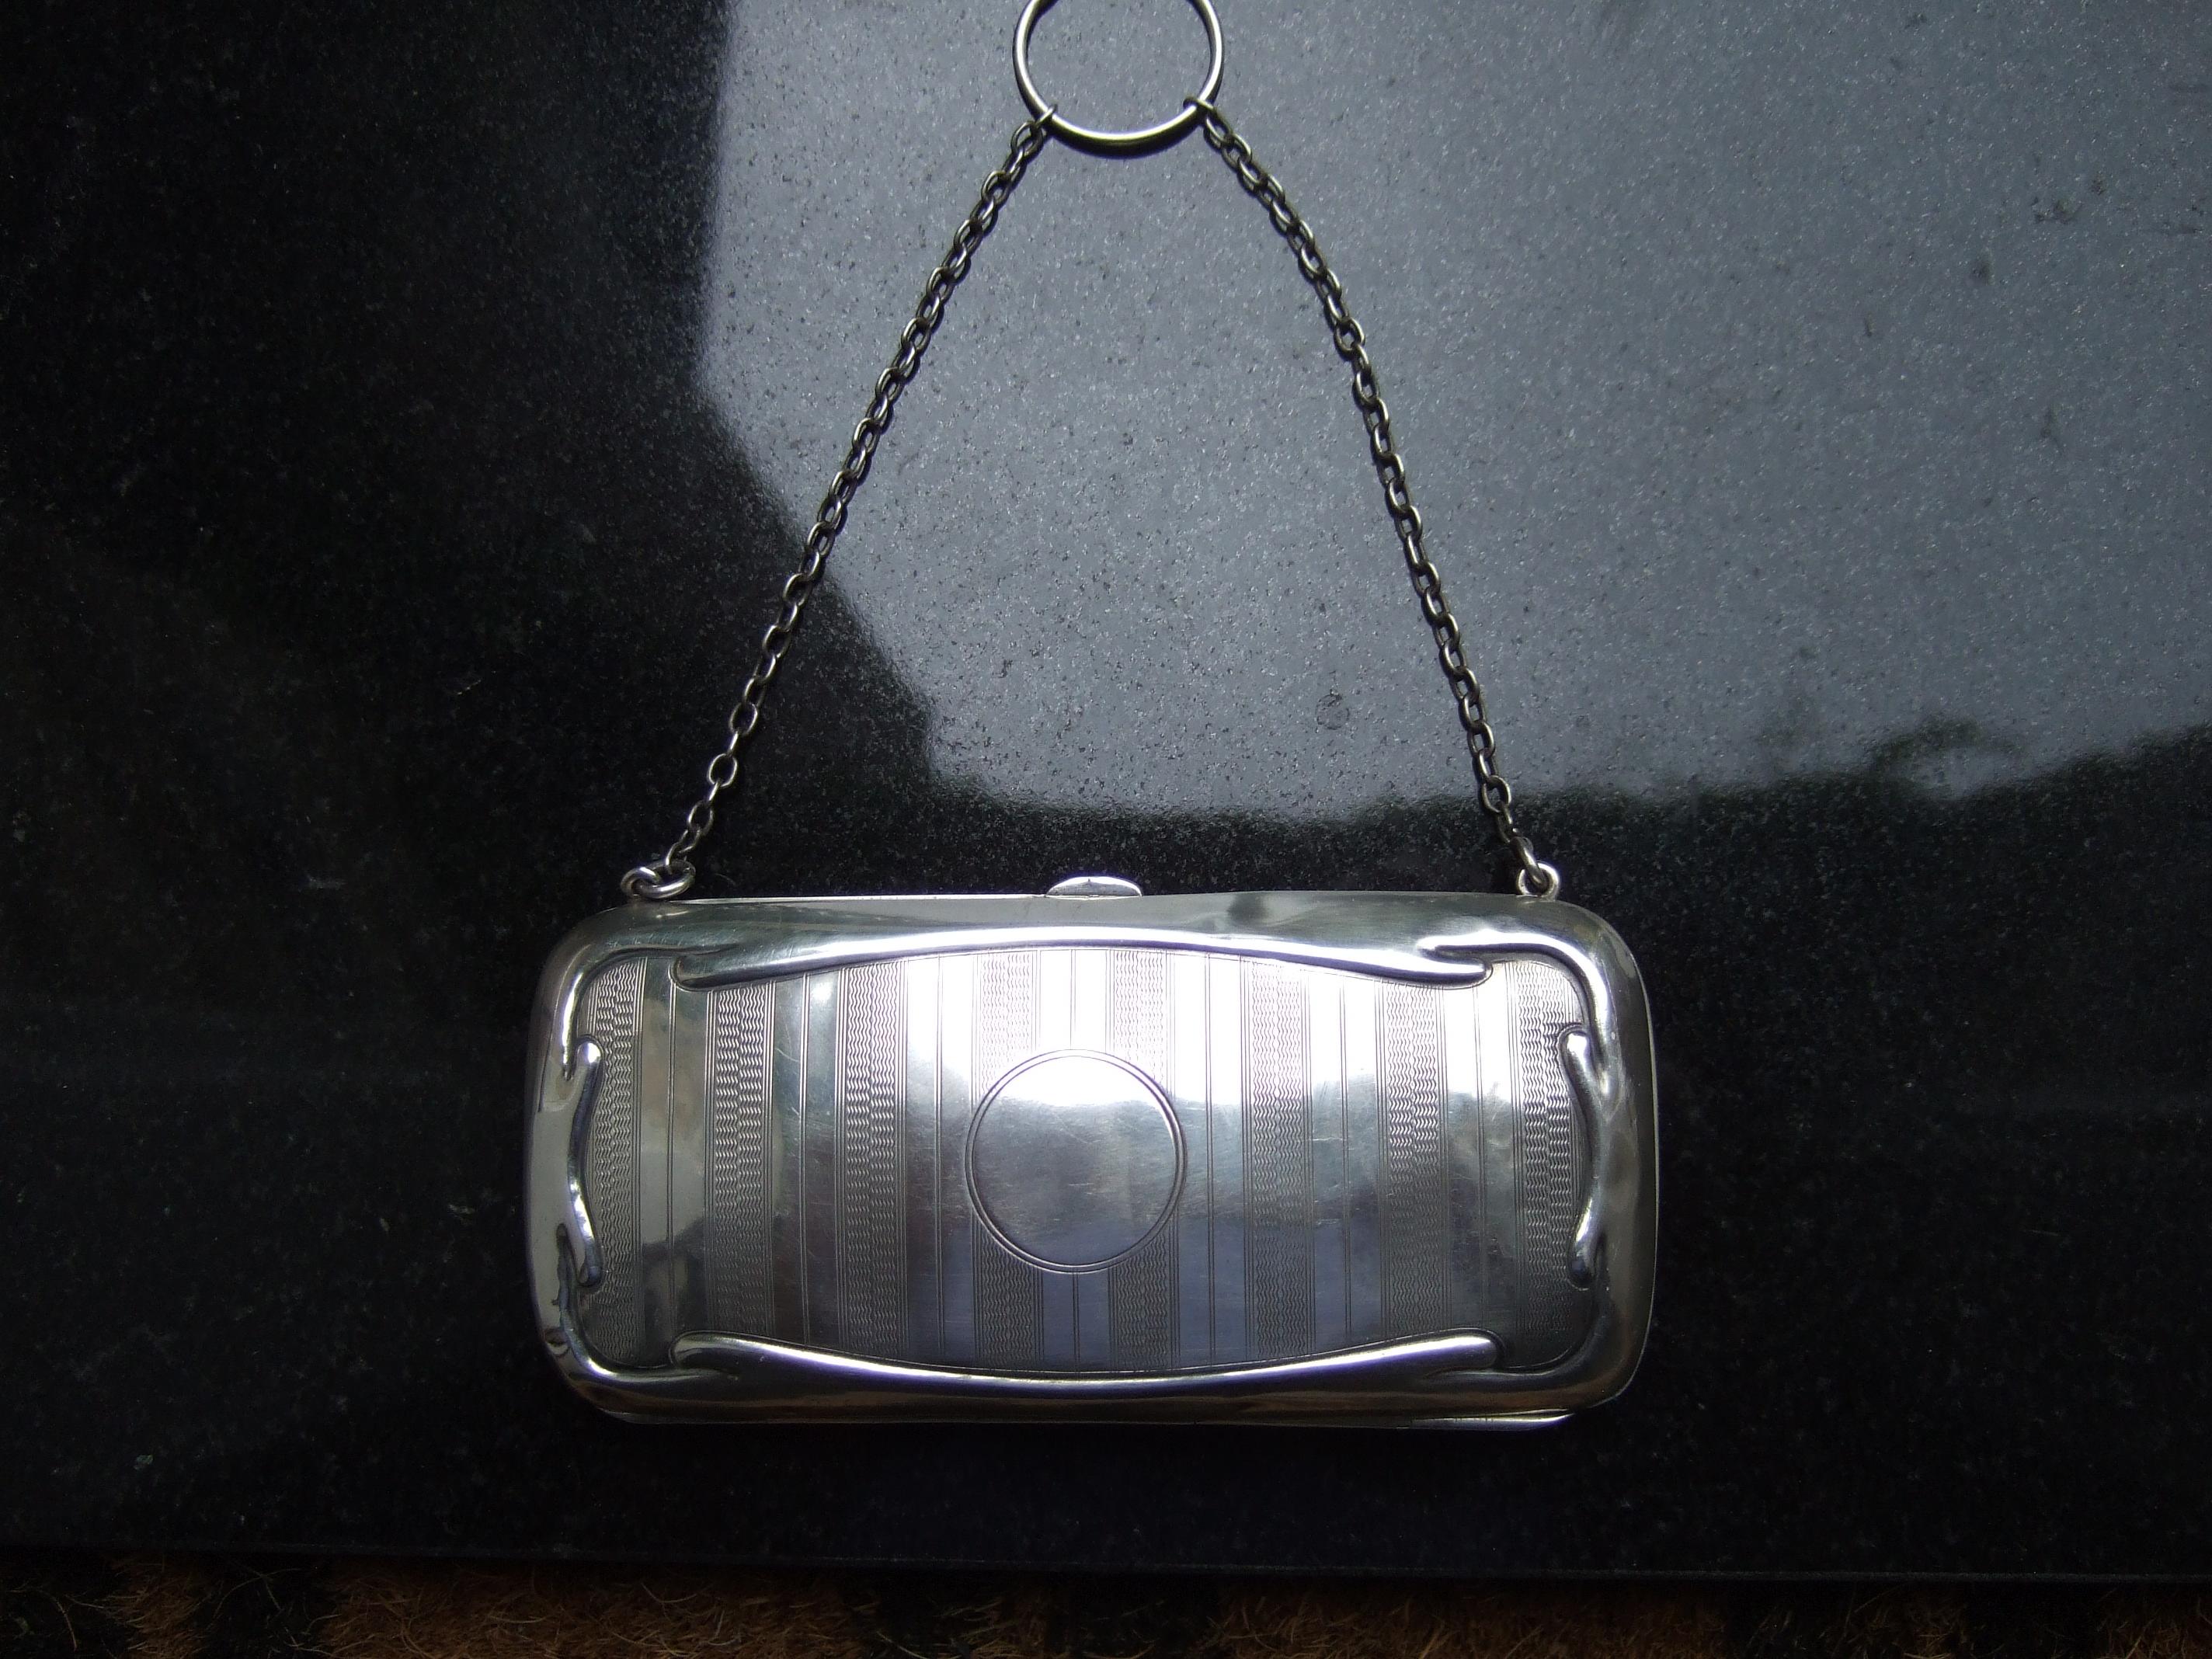 Opulent sterling silver diminutive tiny English antique evening bag c 1916
The elegant small size purse is designed with etched vertical stripes
on both exterior panels

The front sterling panel is designed with a smooth blank circle that
could be